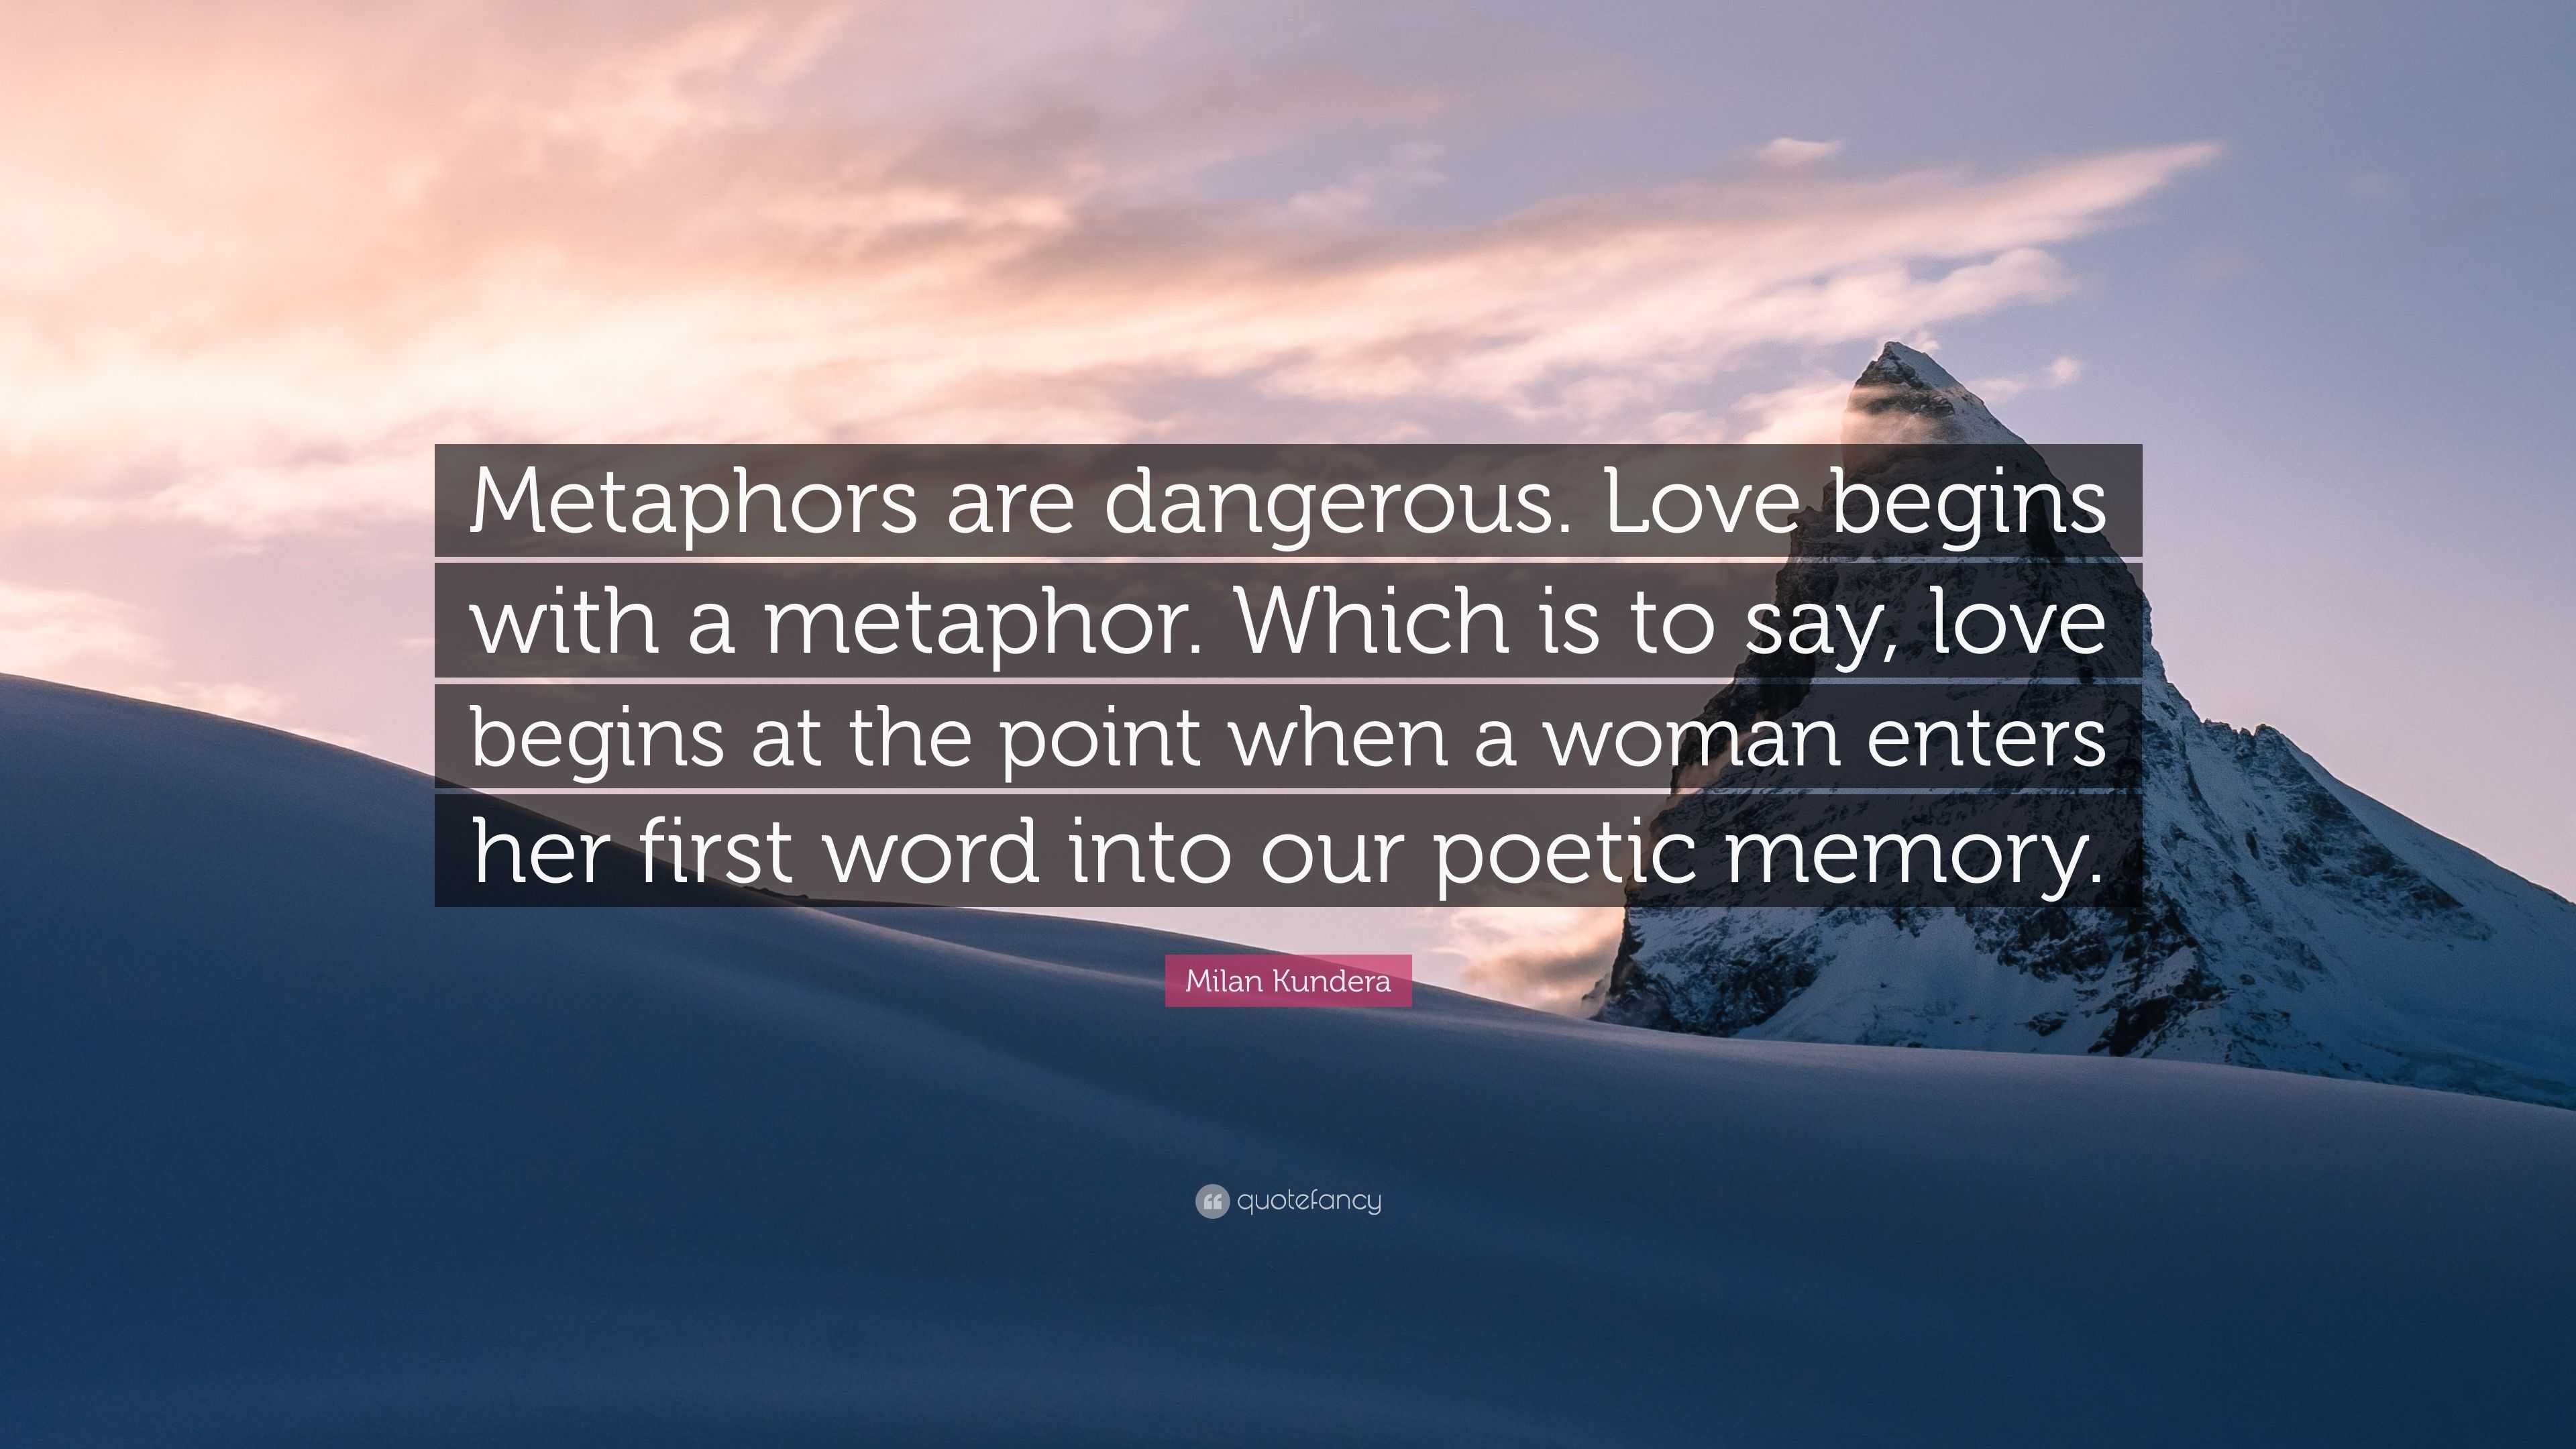 Milan Kundera Quote “metaphors Are Dangerous Love Begins With A Metaphor Which Is To Say